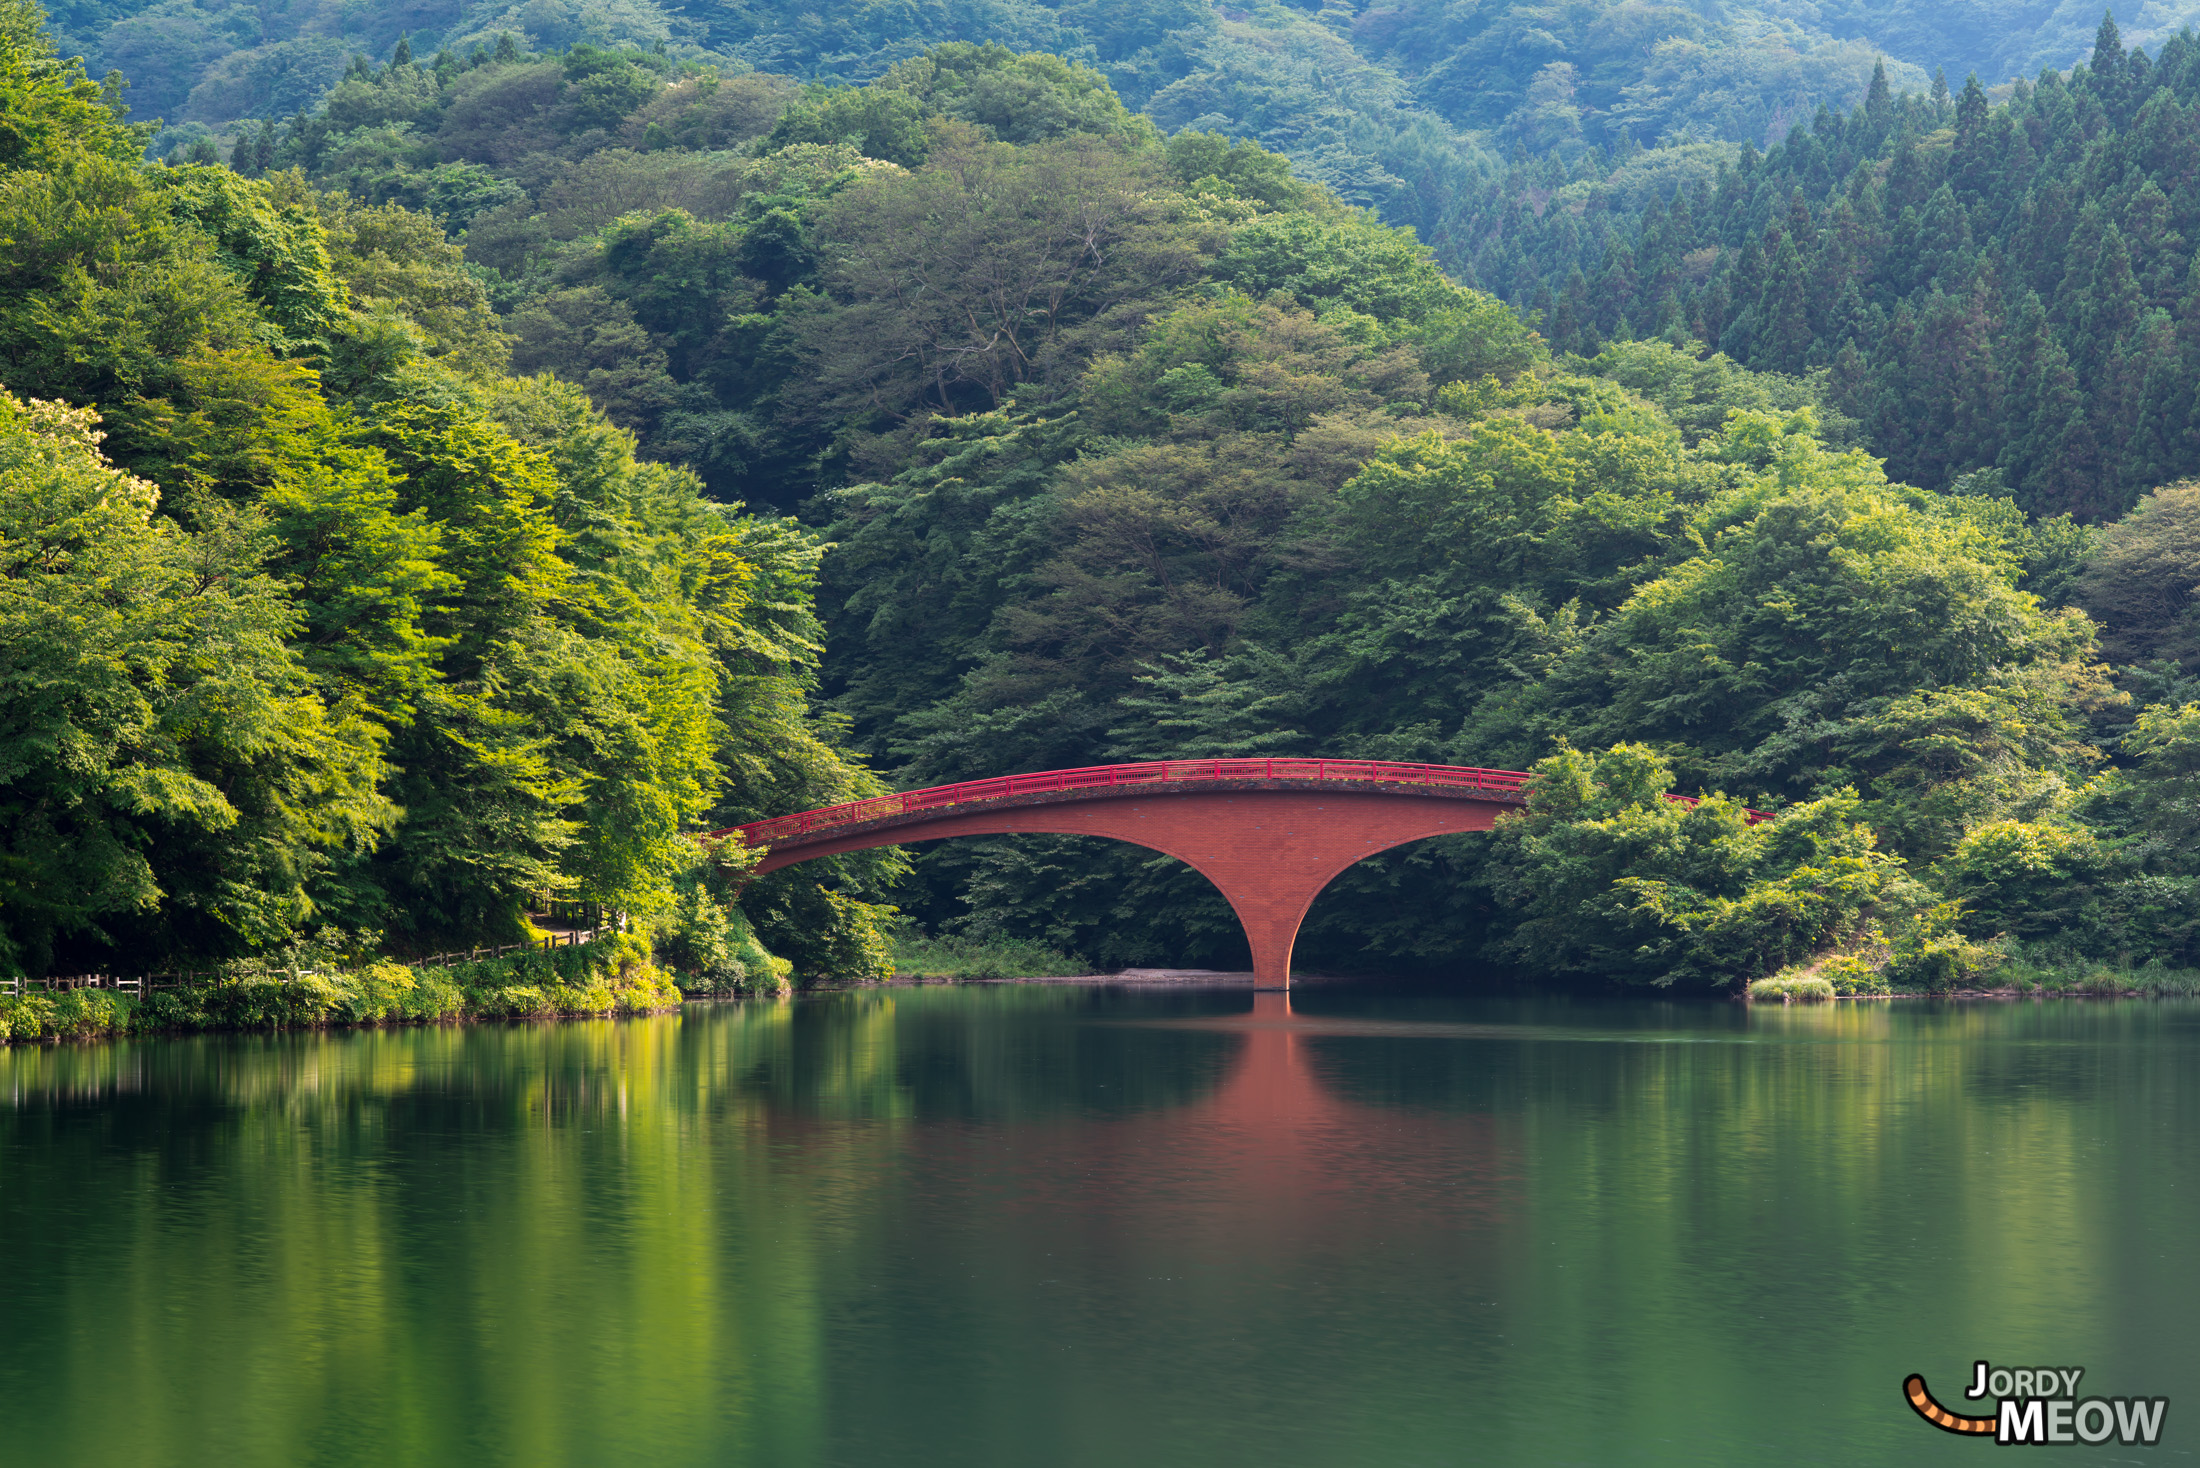 Enigmatic Red Bridge in Gunma, Japan - Tranquil, captivating, mysterious scene in lush nature.